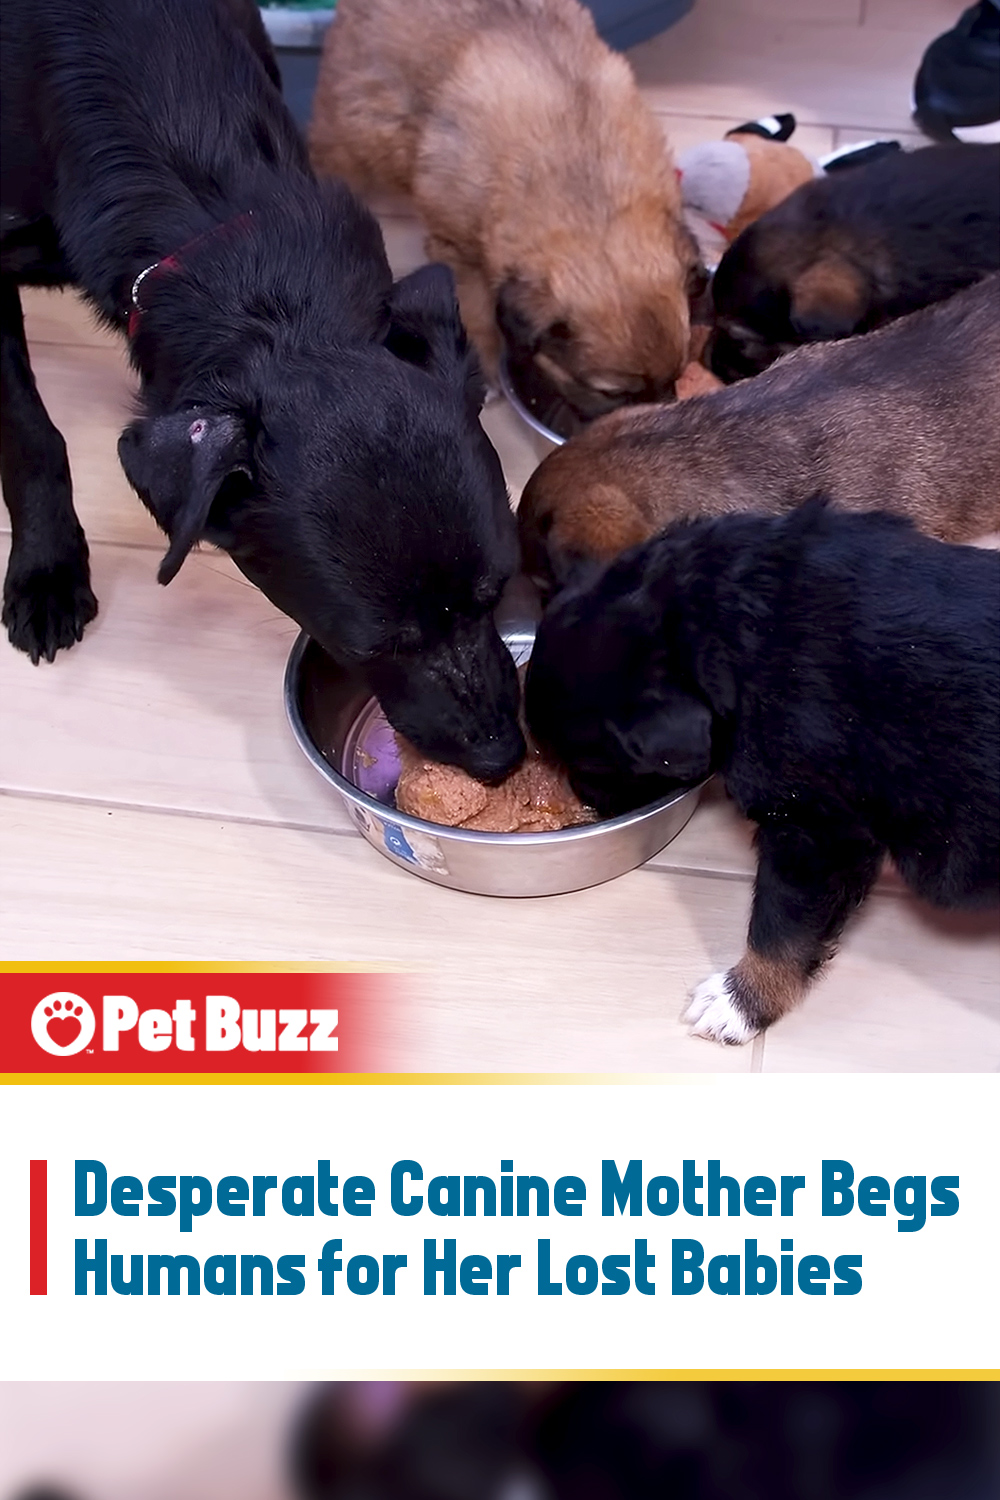 Desperate Canine Mother Begs Humans for Her Lost Babies